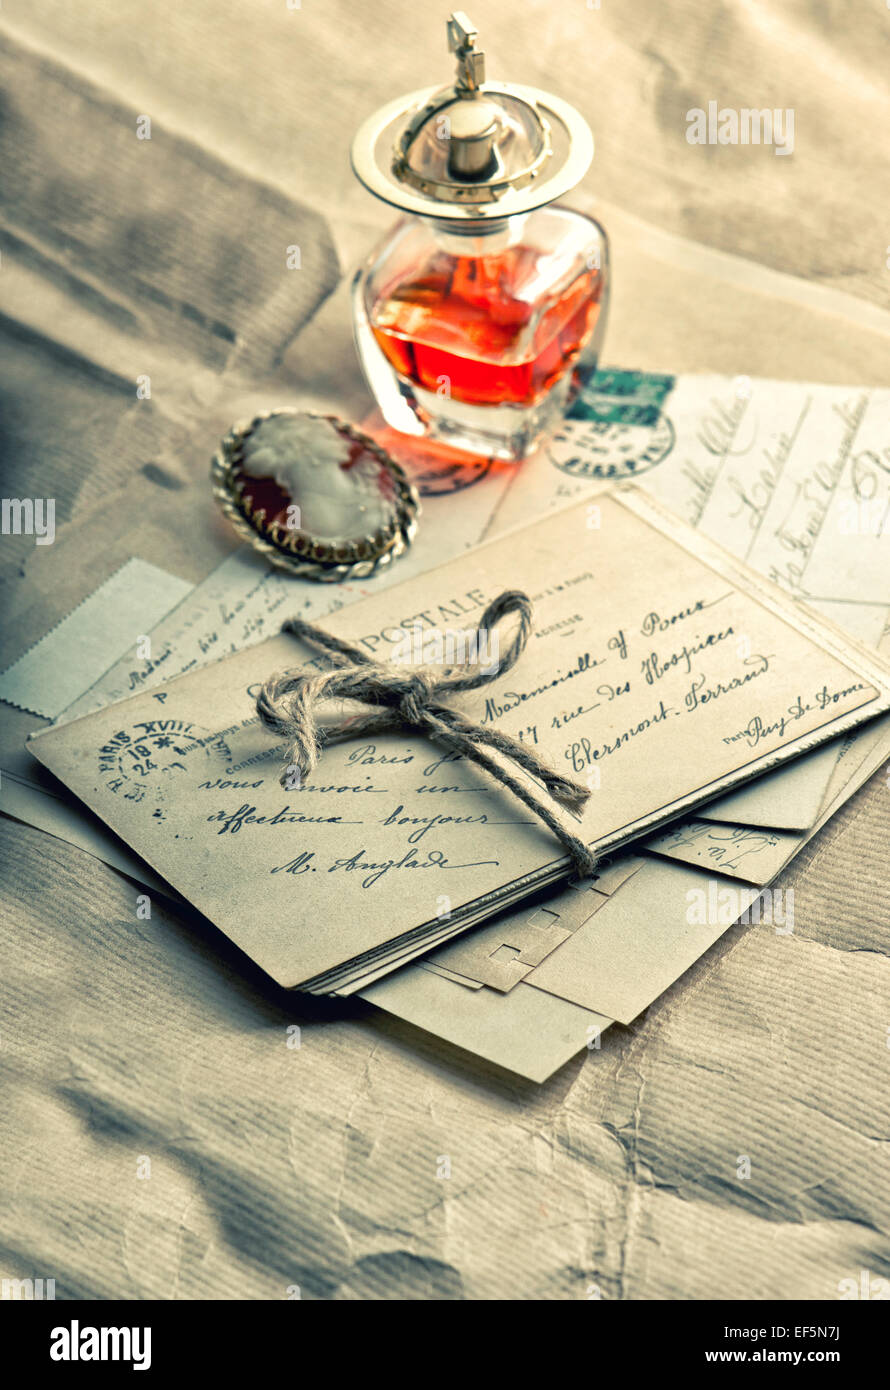 old love letters, antique accessories, perfume and cameo. sentimental nostalgic background. vintage style toned picture Stock Photo